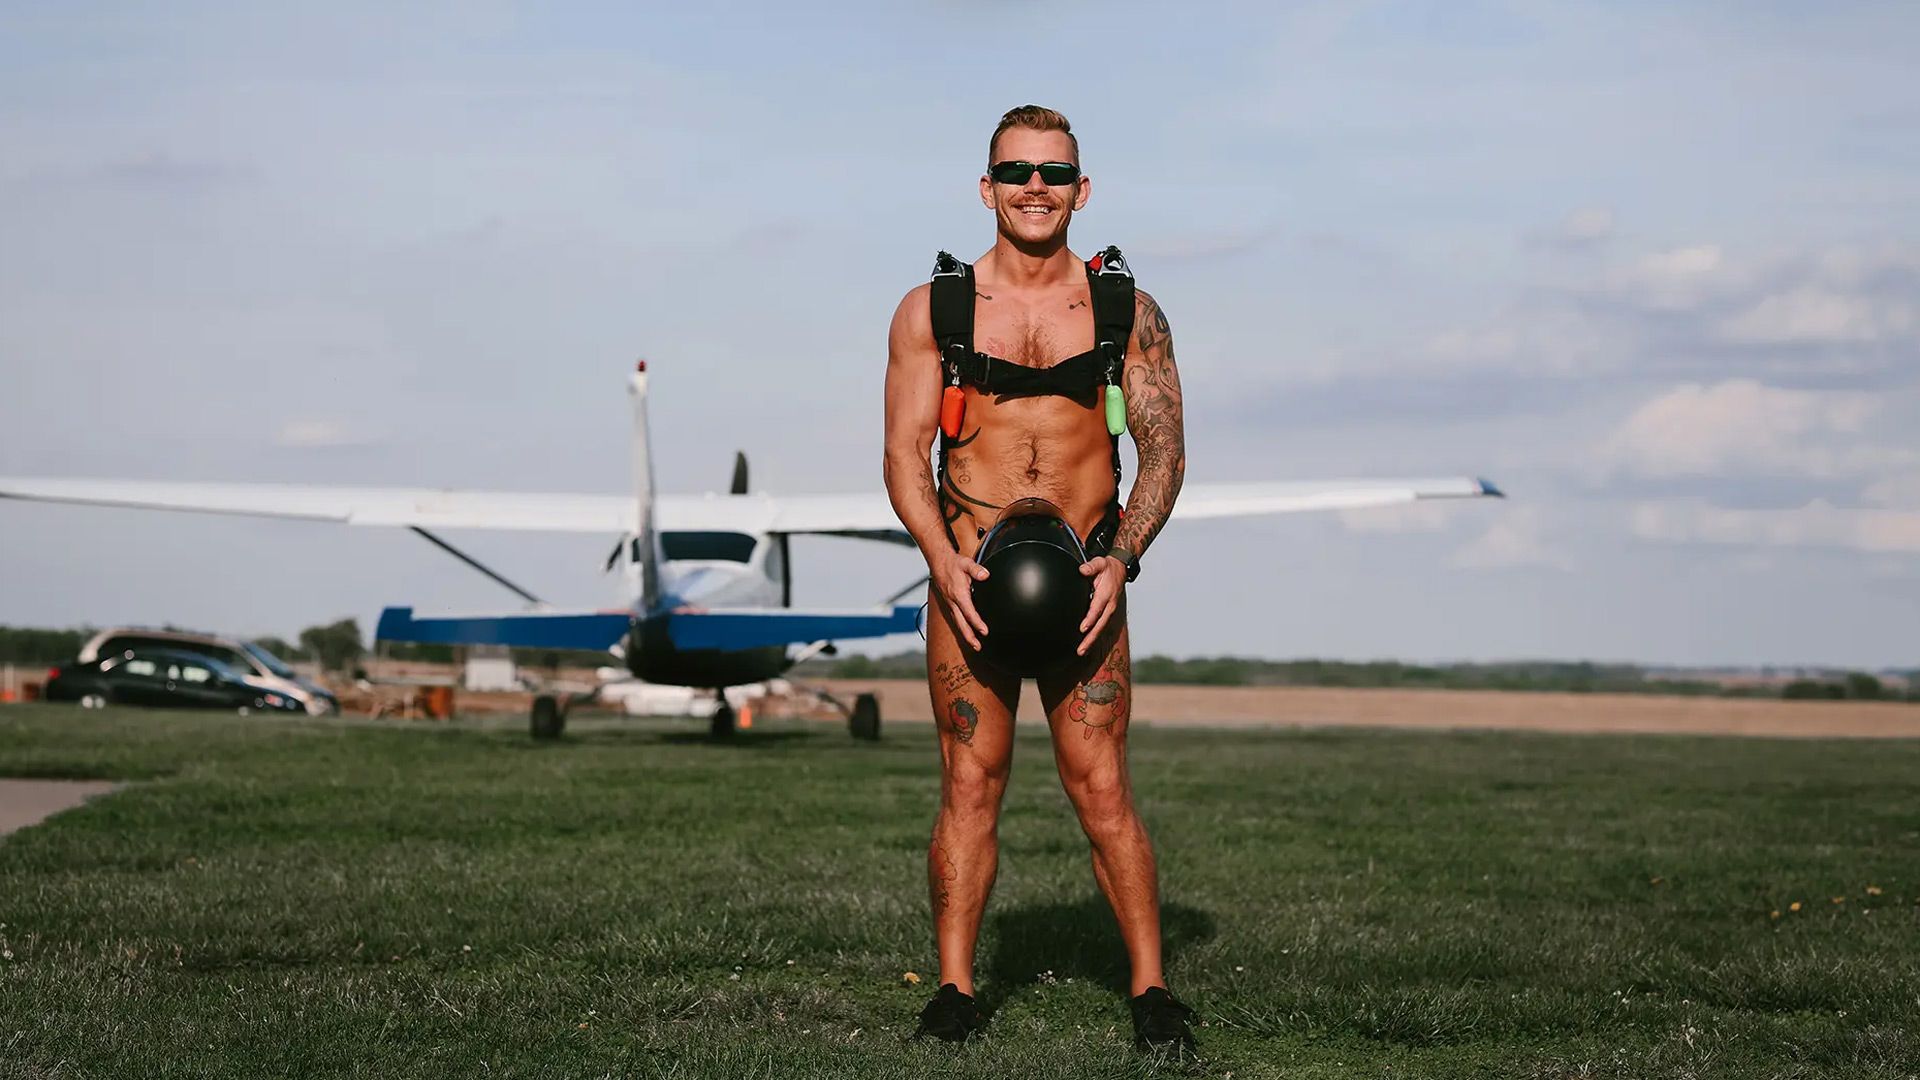 Naked skydiver smiling to camera, standing in front of aircraft.